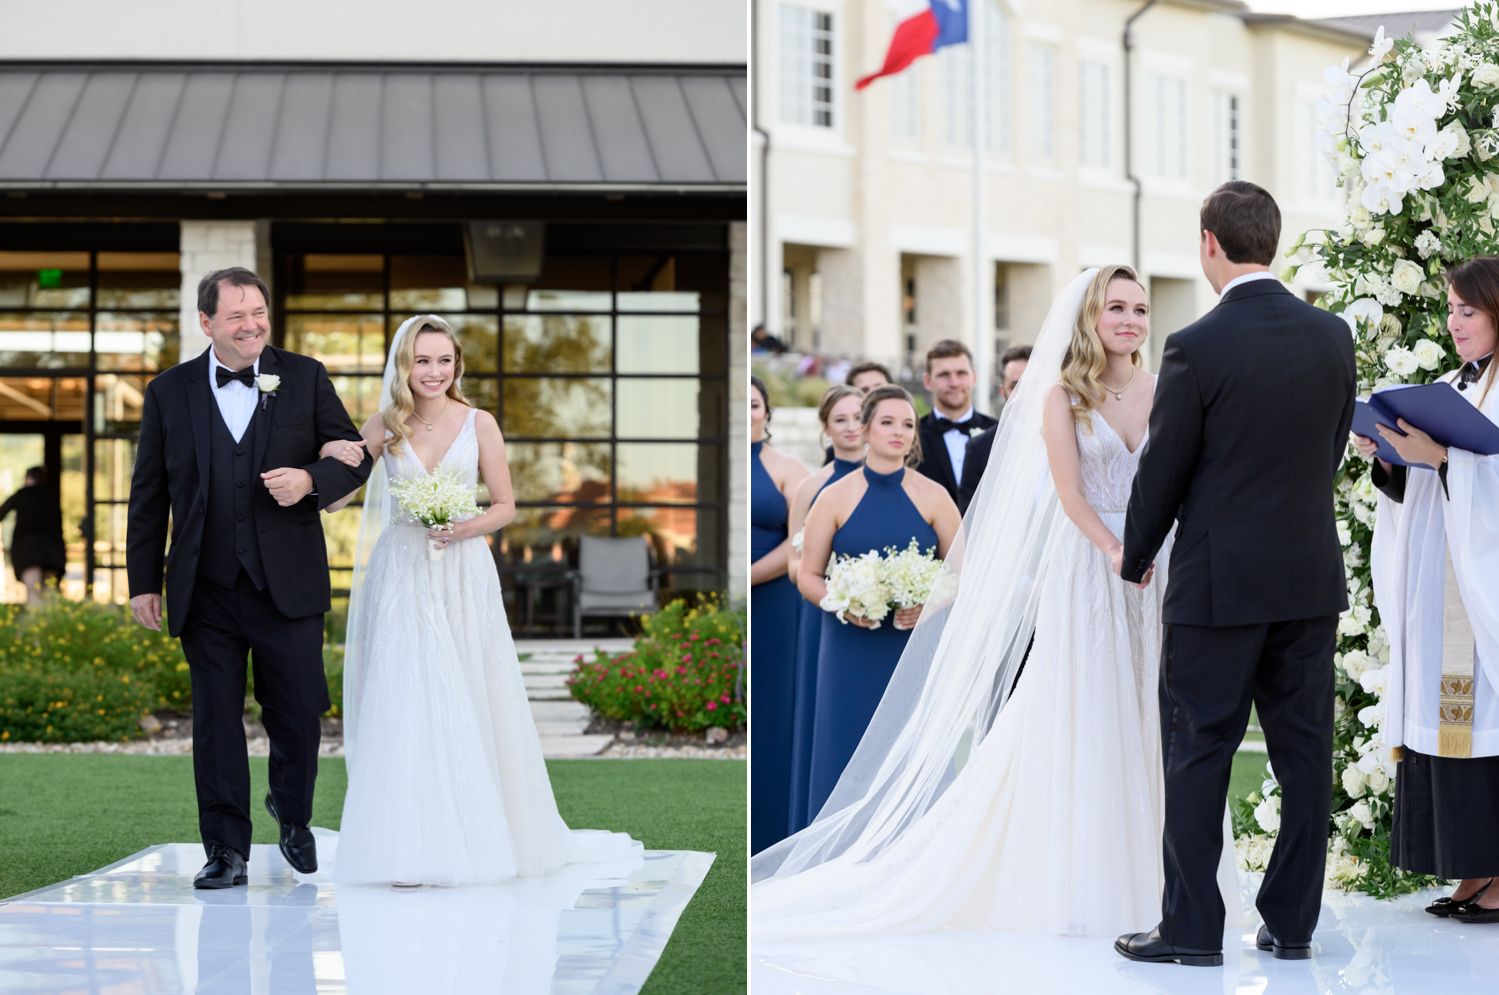 Left: The bride walks down the aisle, escorted by her father. Right: The bride and groom hold hands at the altar and smile at each other.